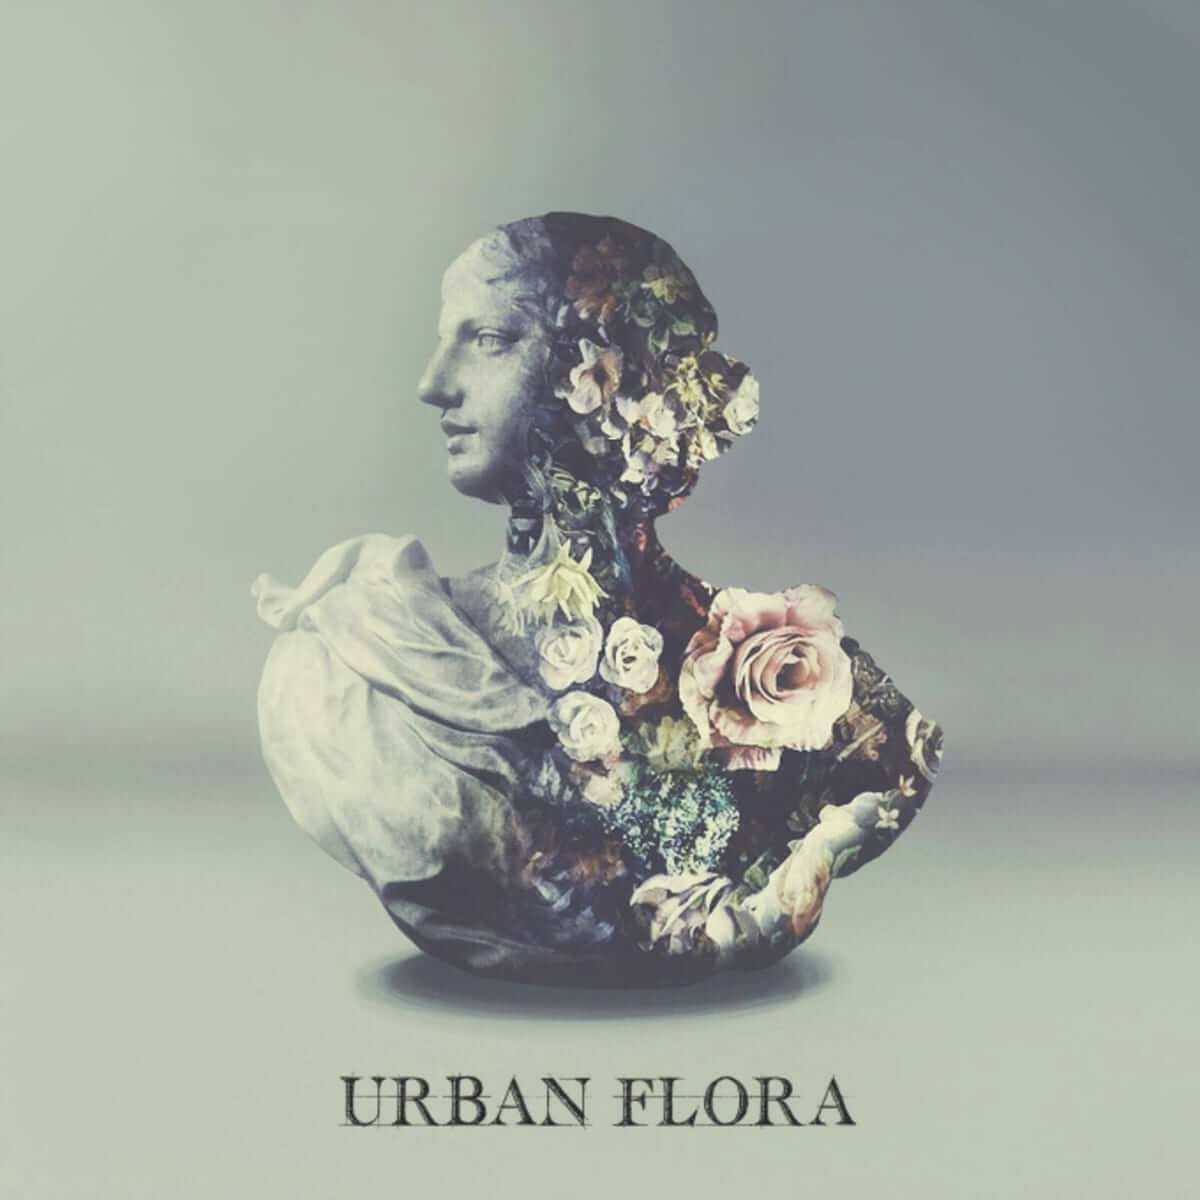 ‘Urban Flora’ is This Week’s Throwback Thursday Treat!